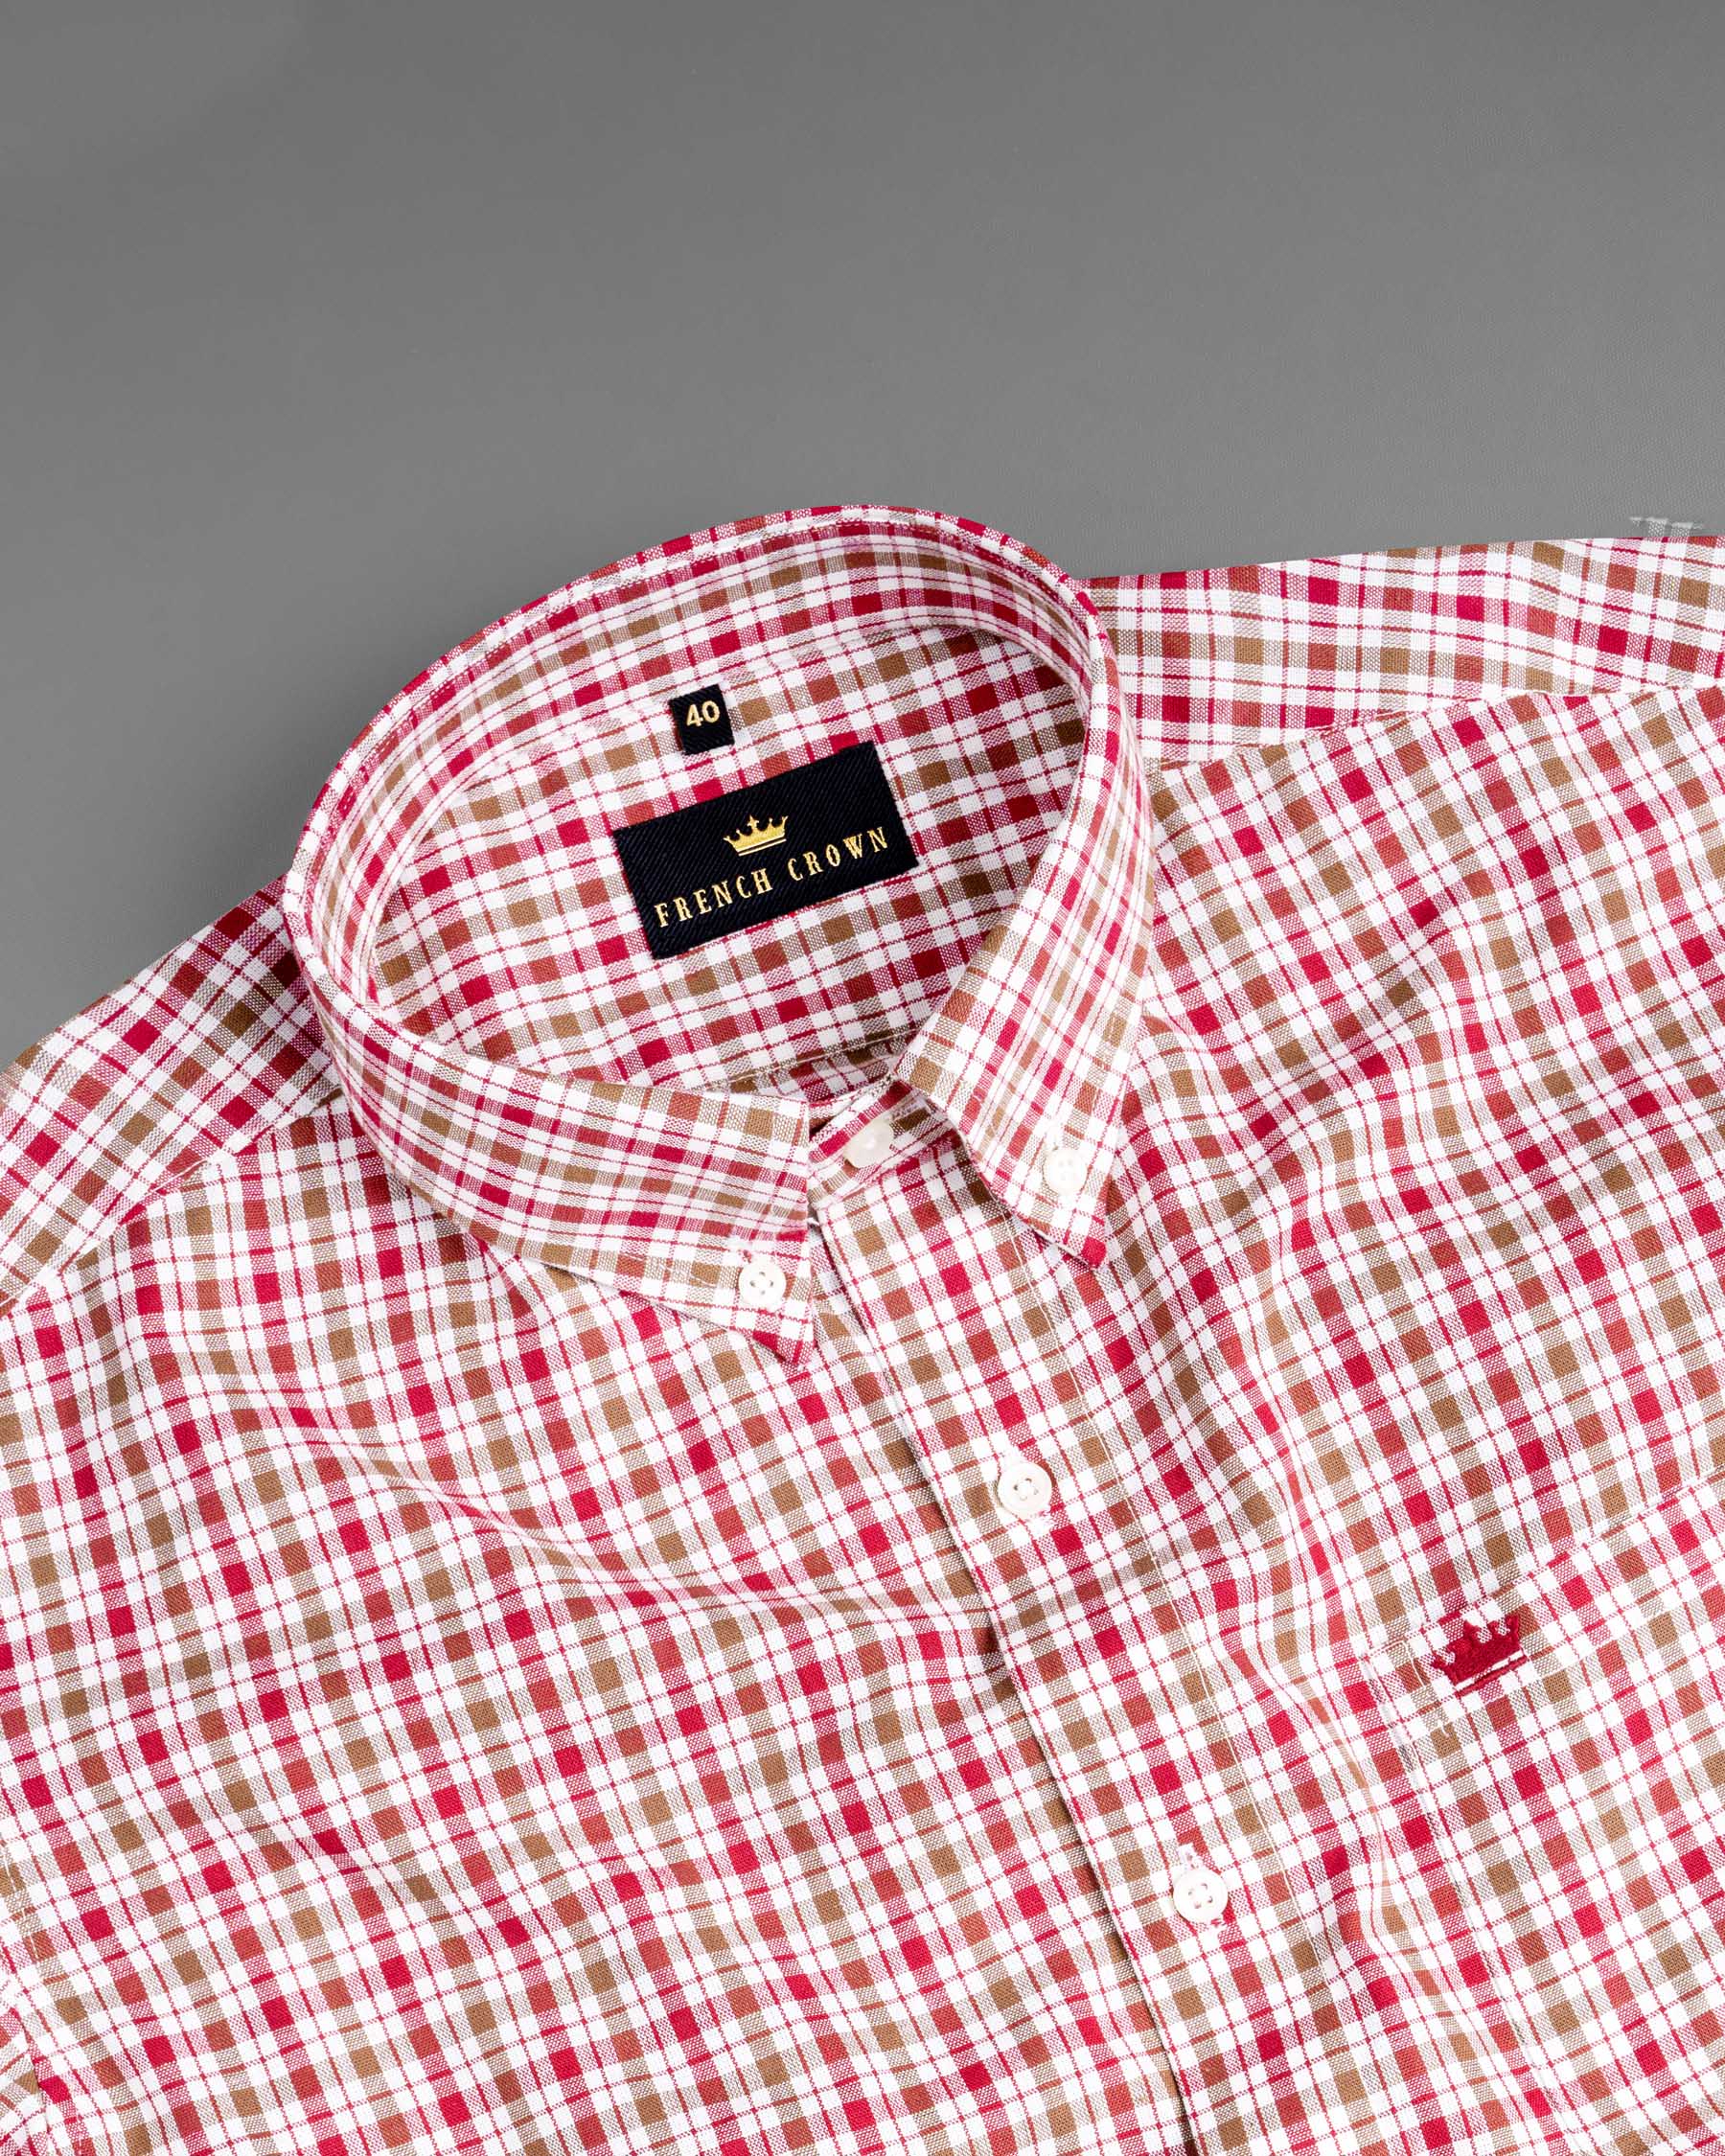 Raspberry Pink with Mocha Brown Checked Royal Oxford Shirt